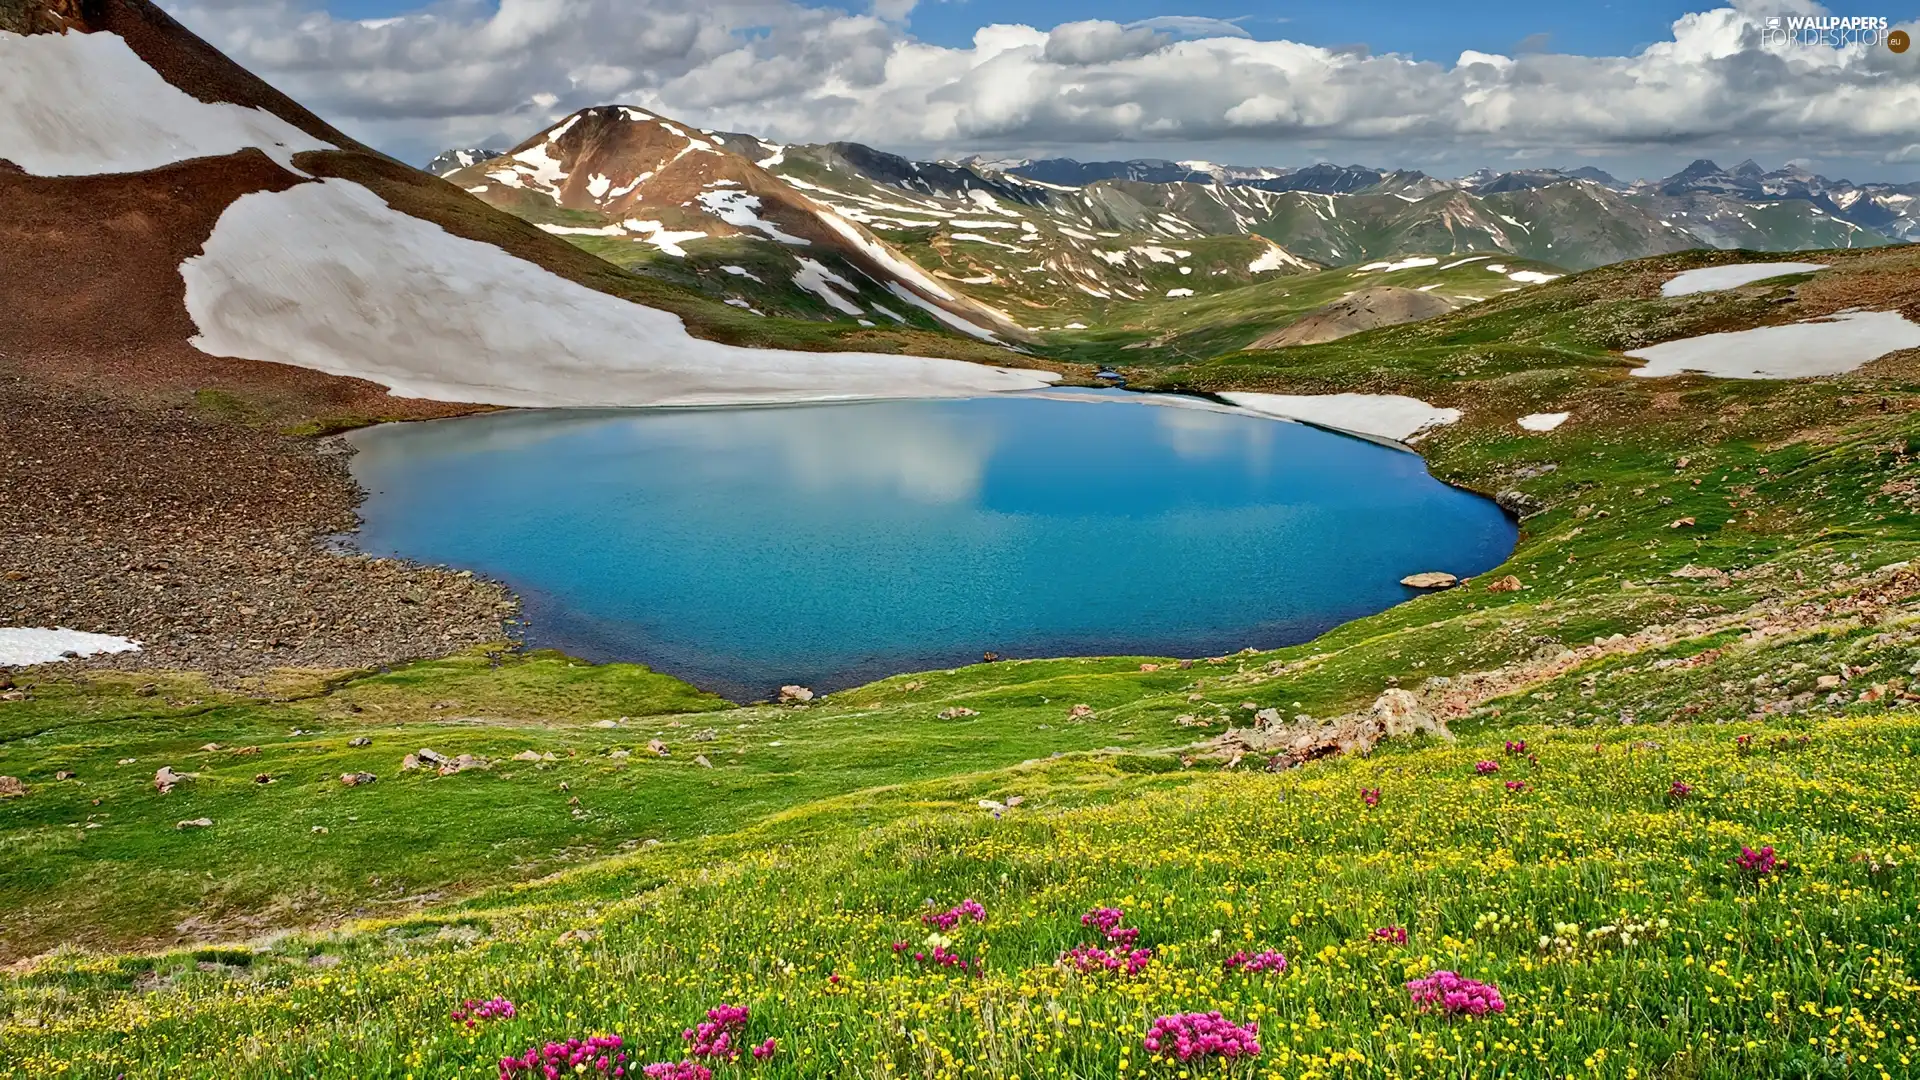 Mountains, Pond - car, Flowers, clouds